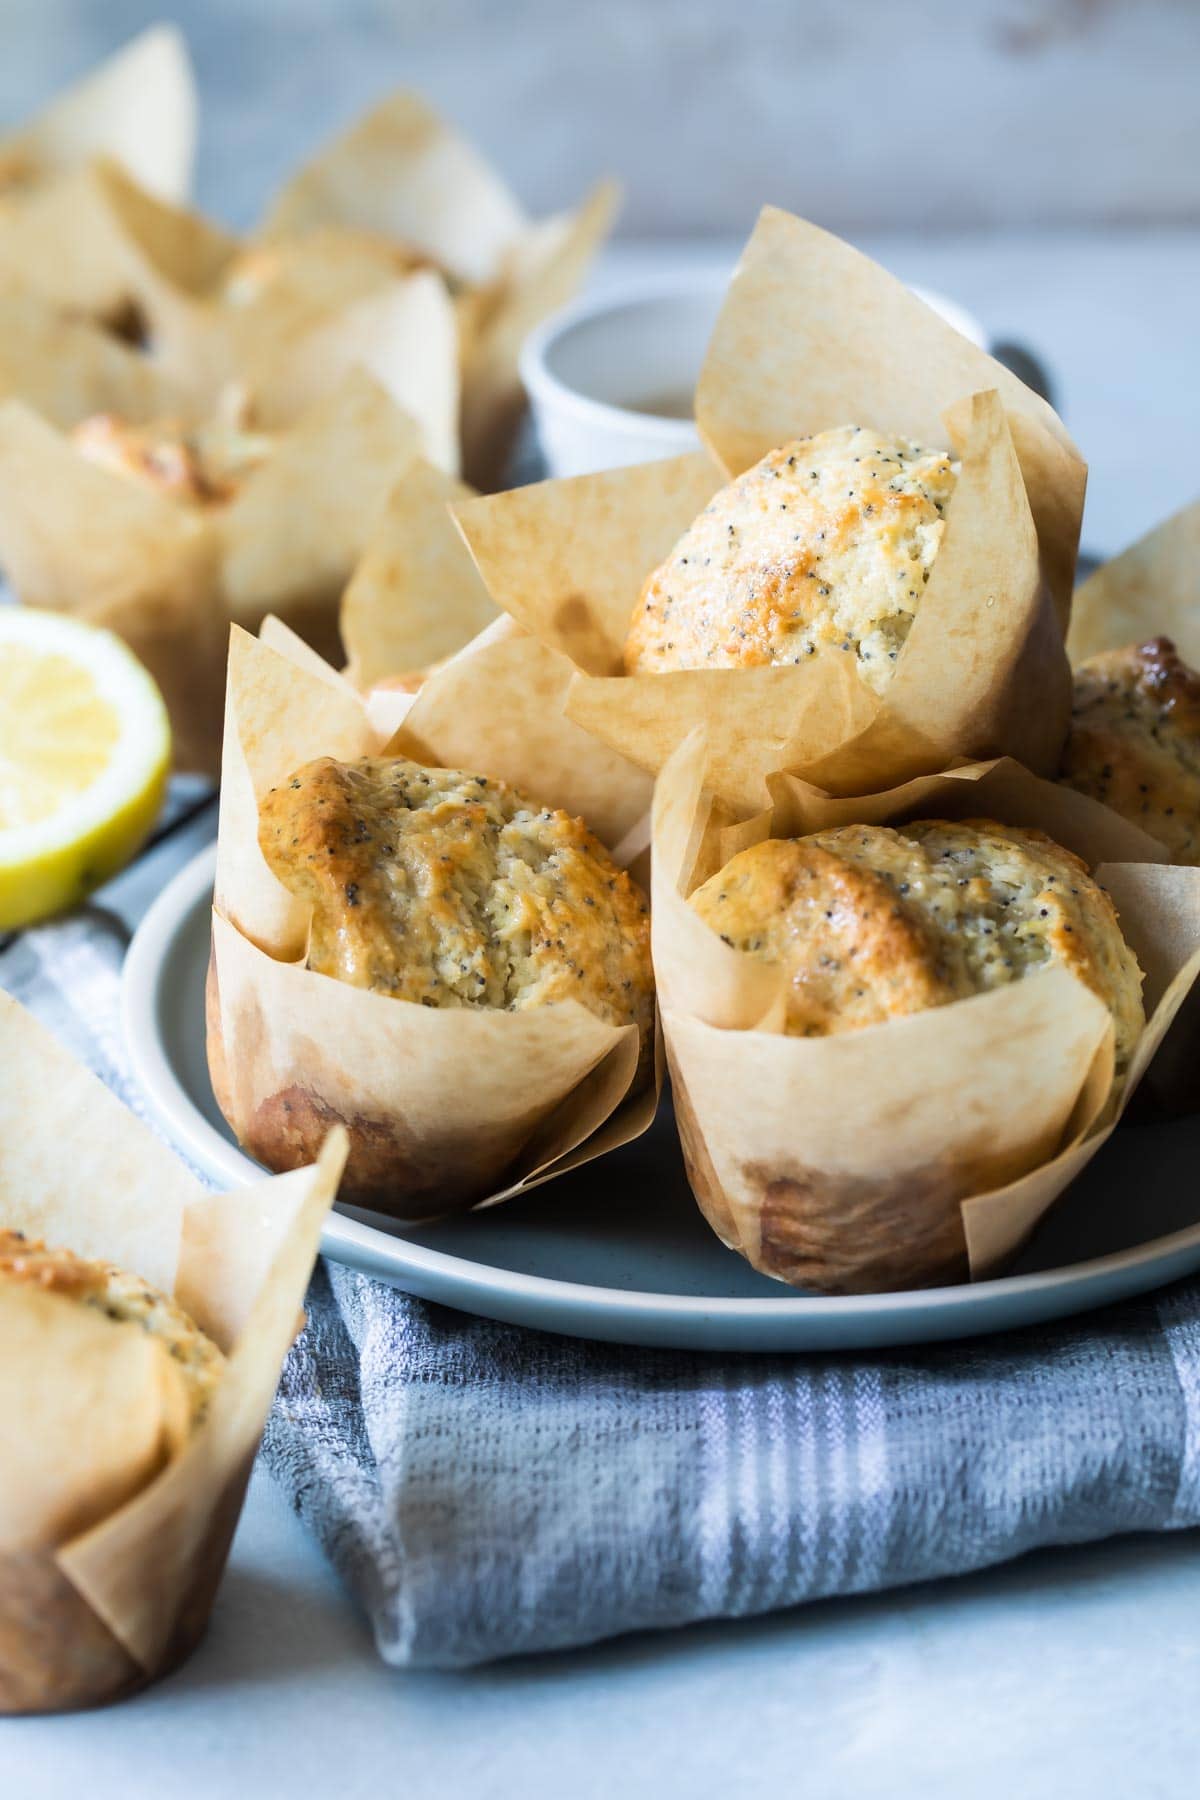 Lemon Poppy Seed Muffins baked in paper cups.